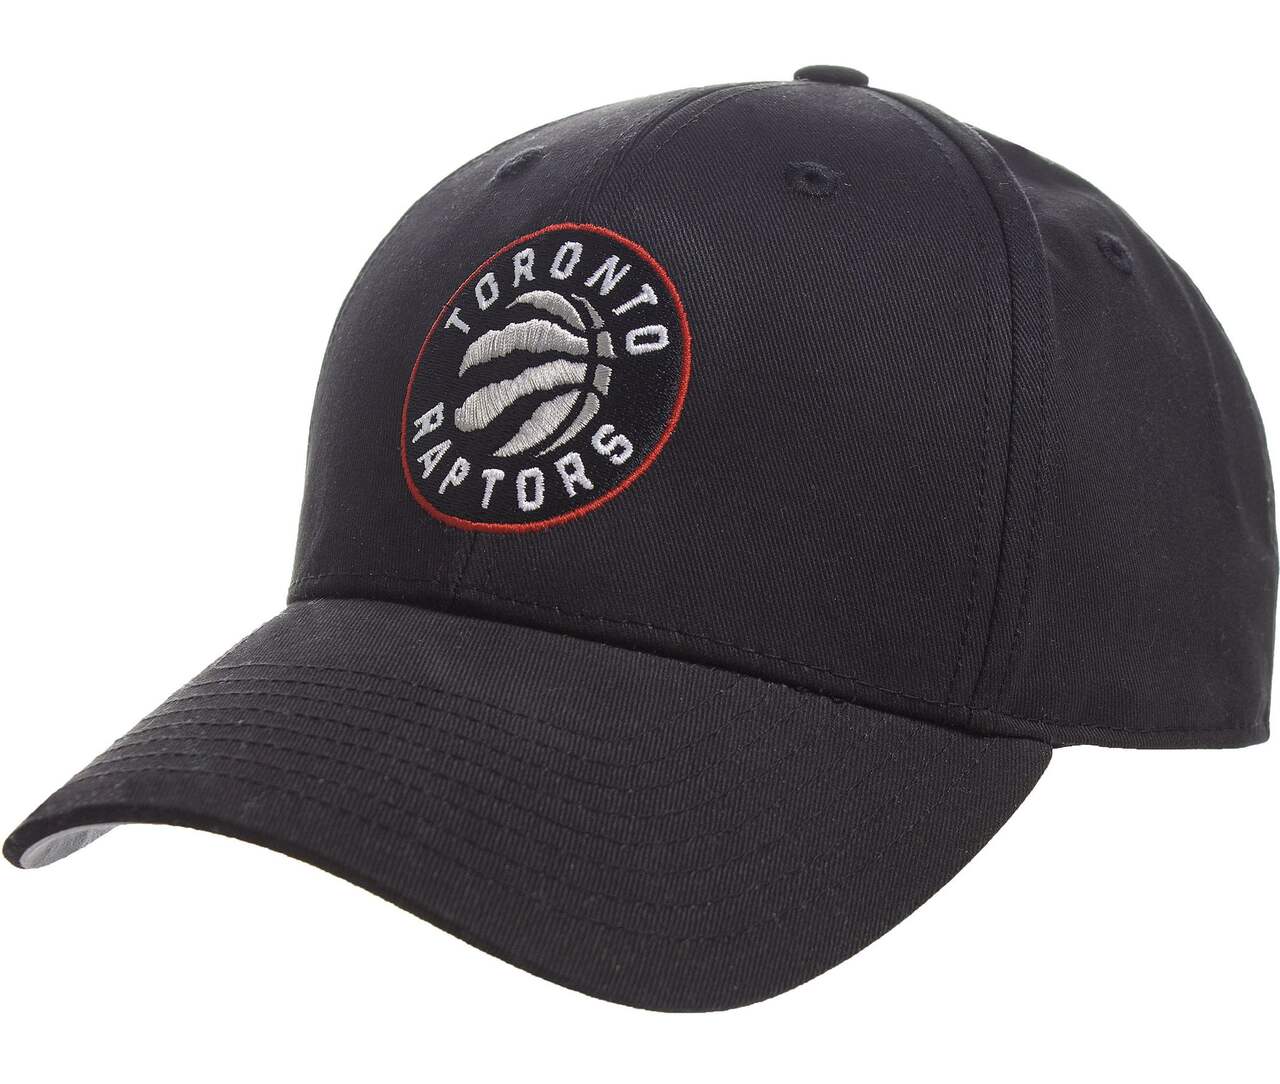 https://media-www.canadiantire.ca/product/playing/team-sports-and-golf/sports-equipment-accessories/0847976/toronto-raptors-black-cap-1d4c17cf-a2b1-4caf-9a4b-f7c2a91b519d-jpgrendition.jpg?imdensity=1&imwidth=640&impolicy=mZoom